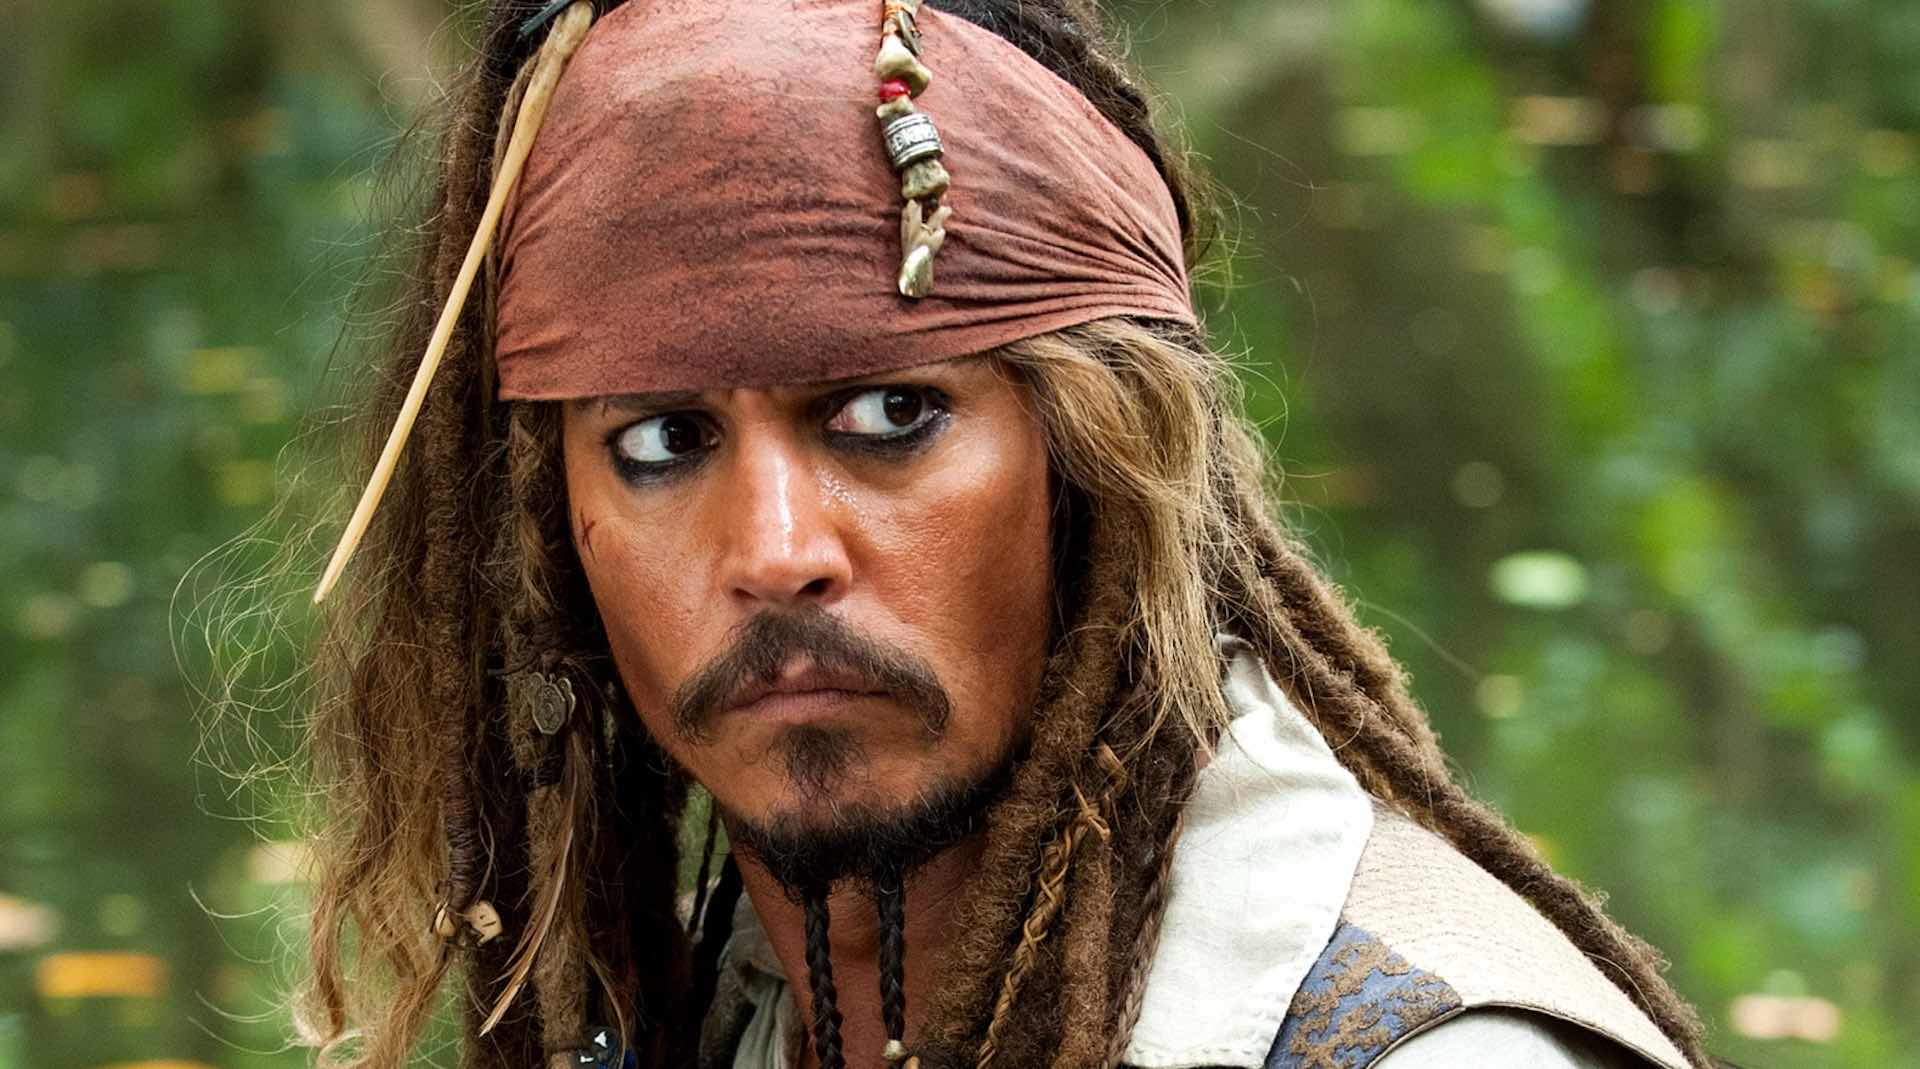 Disney reportedly offered Johnny Depp 0 million to return as Jack Sparrow